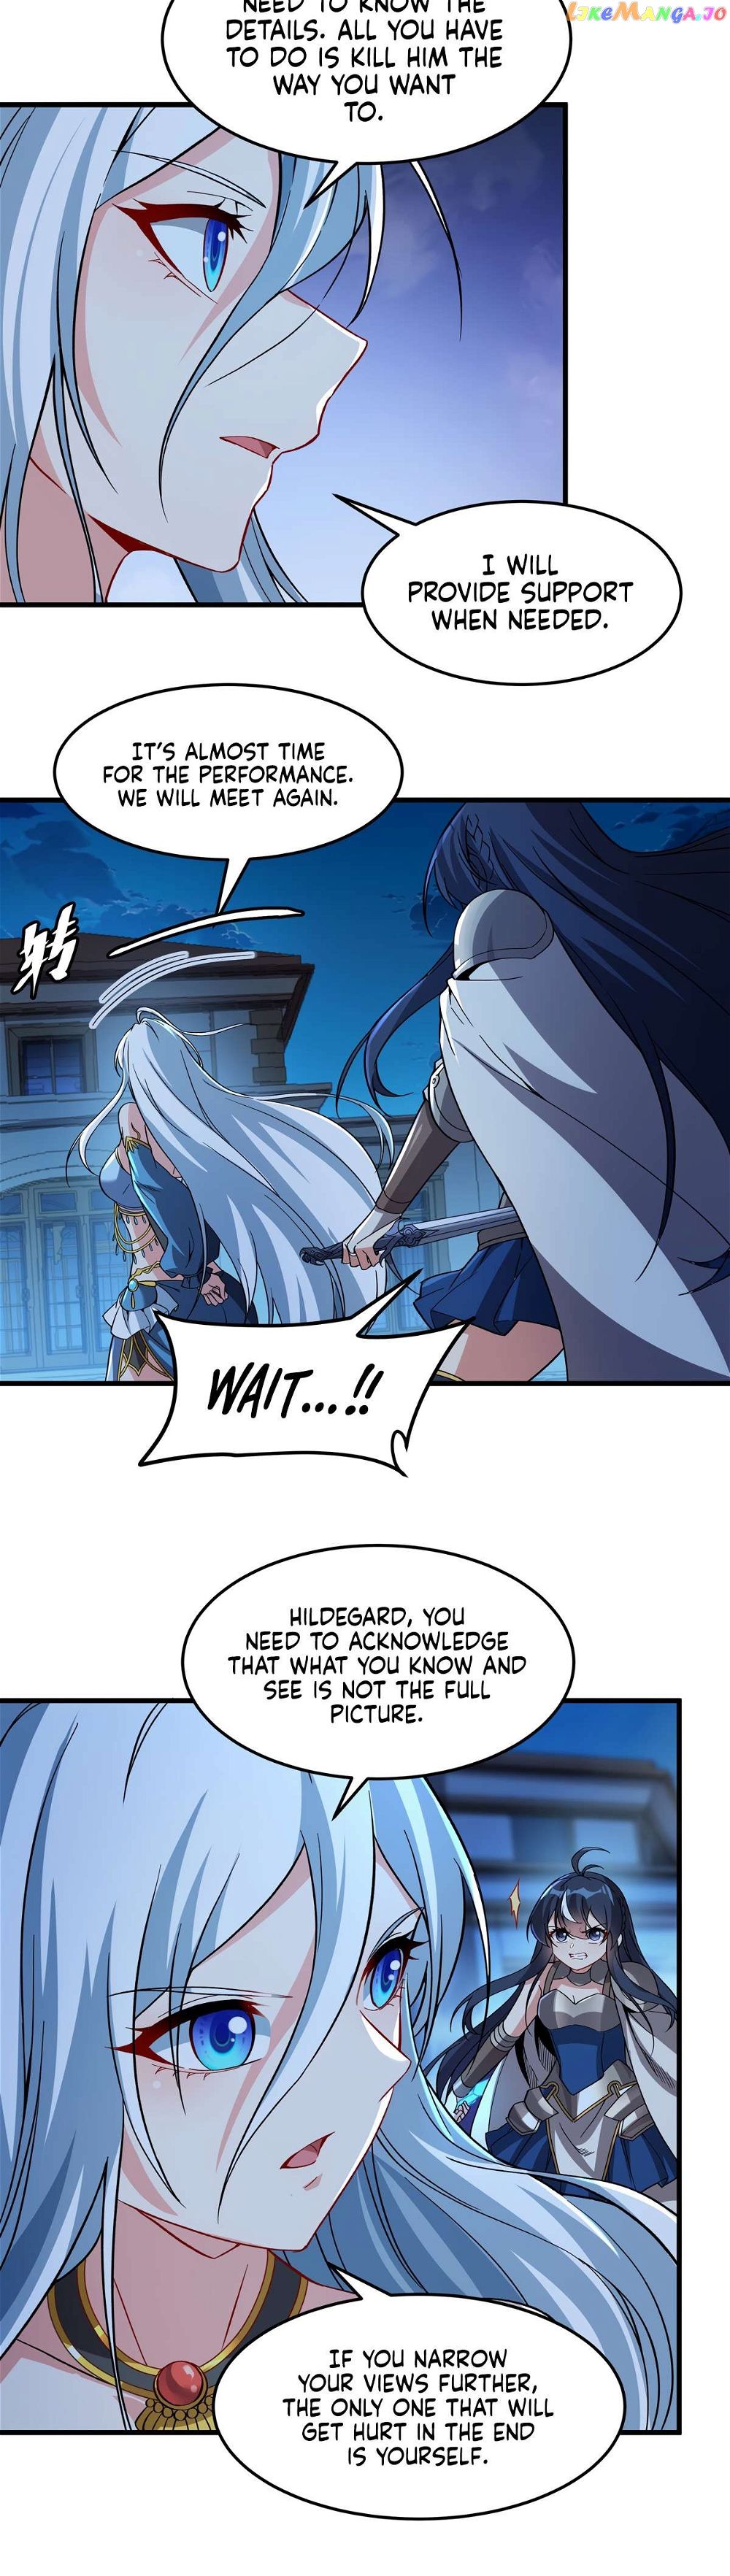 I, The Abyssal, Have Decided to Save Humanity Again Today Chapter 128 - Page 3